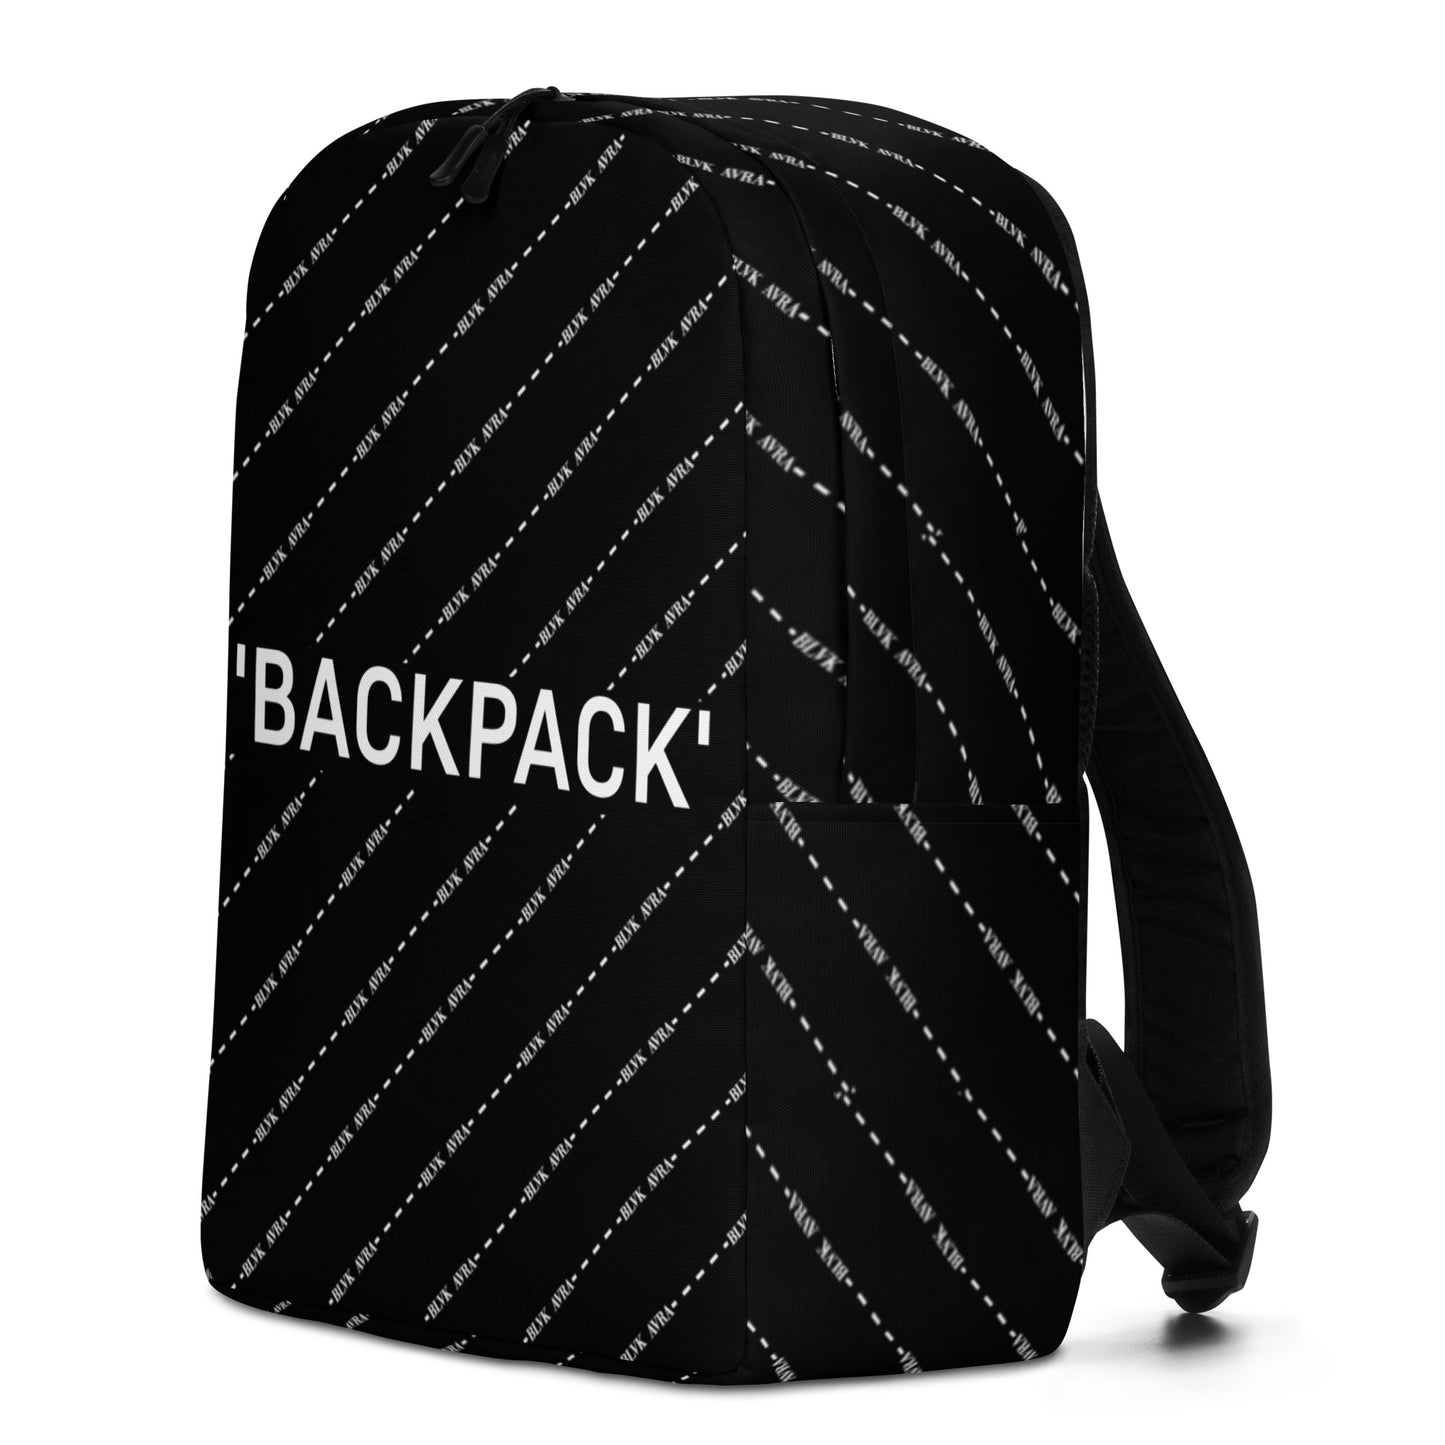 The BackPack